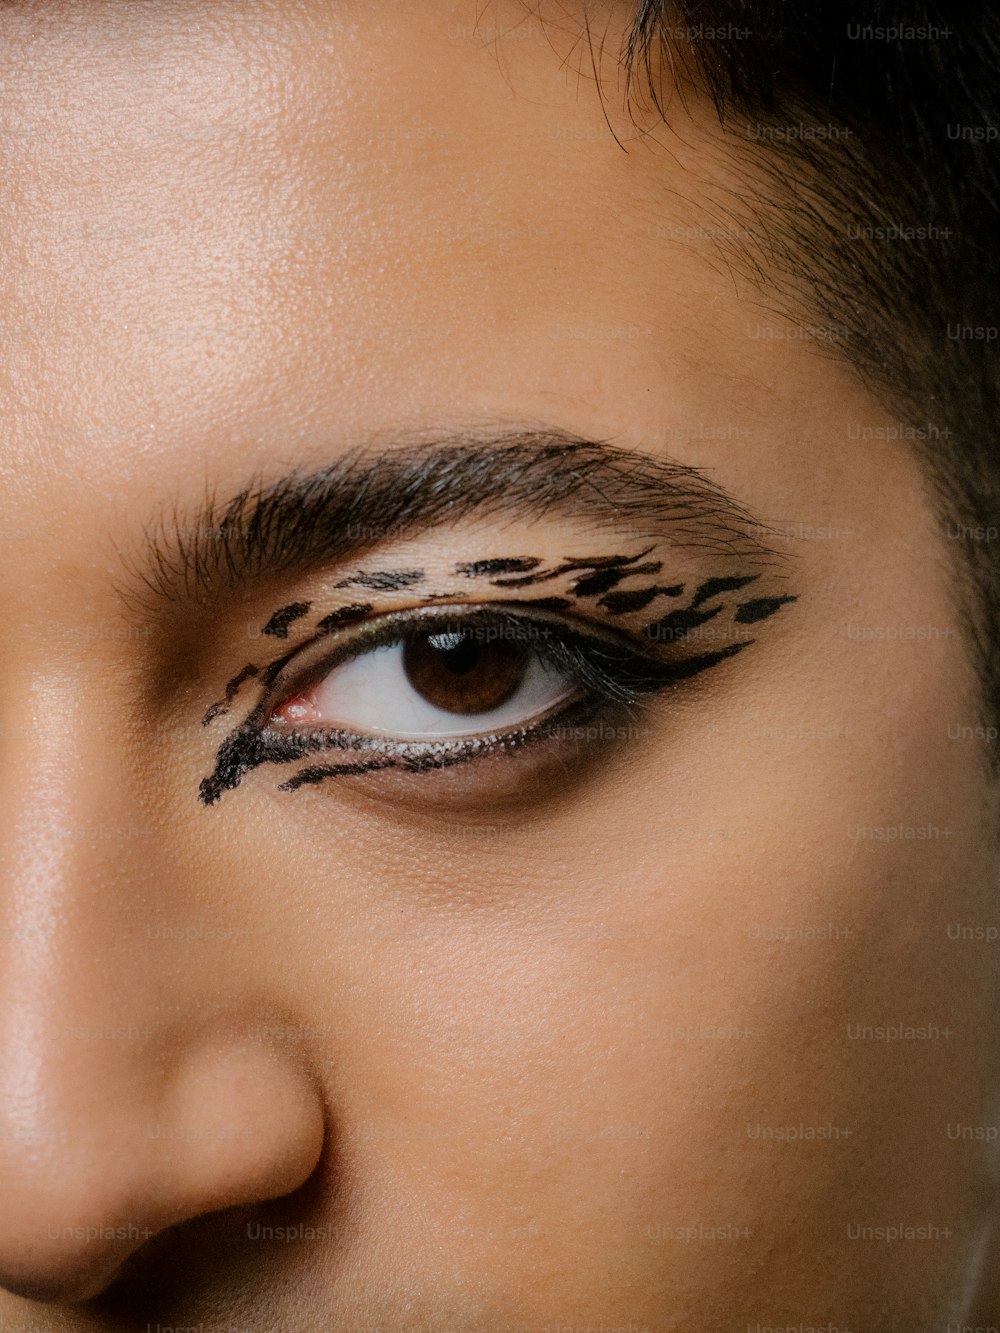 a close up of a person's face with eyeliners